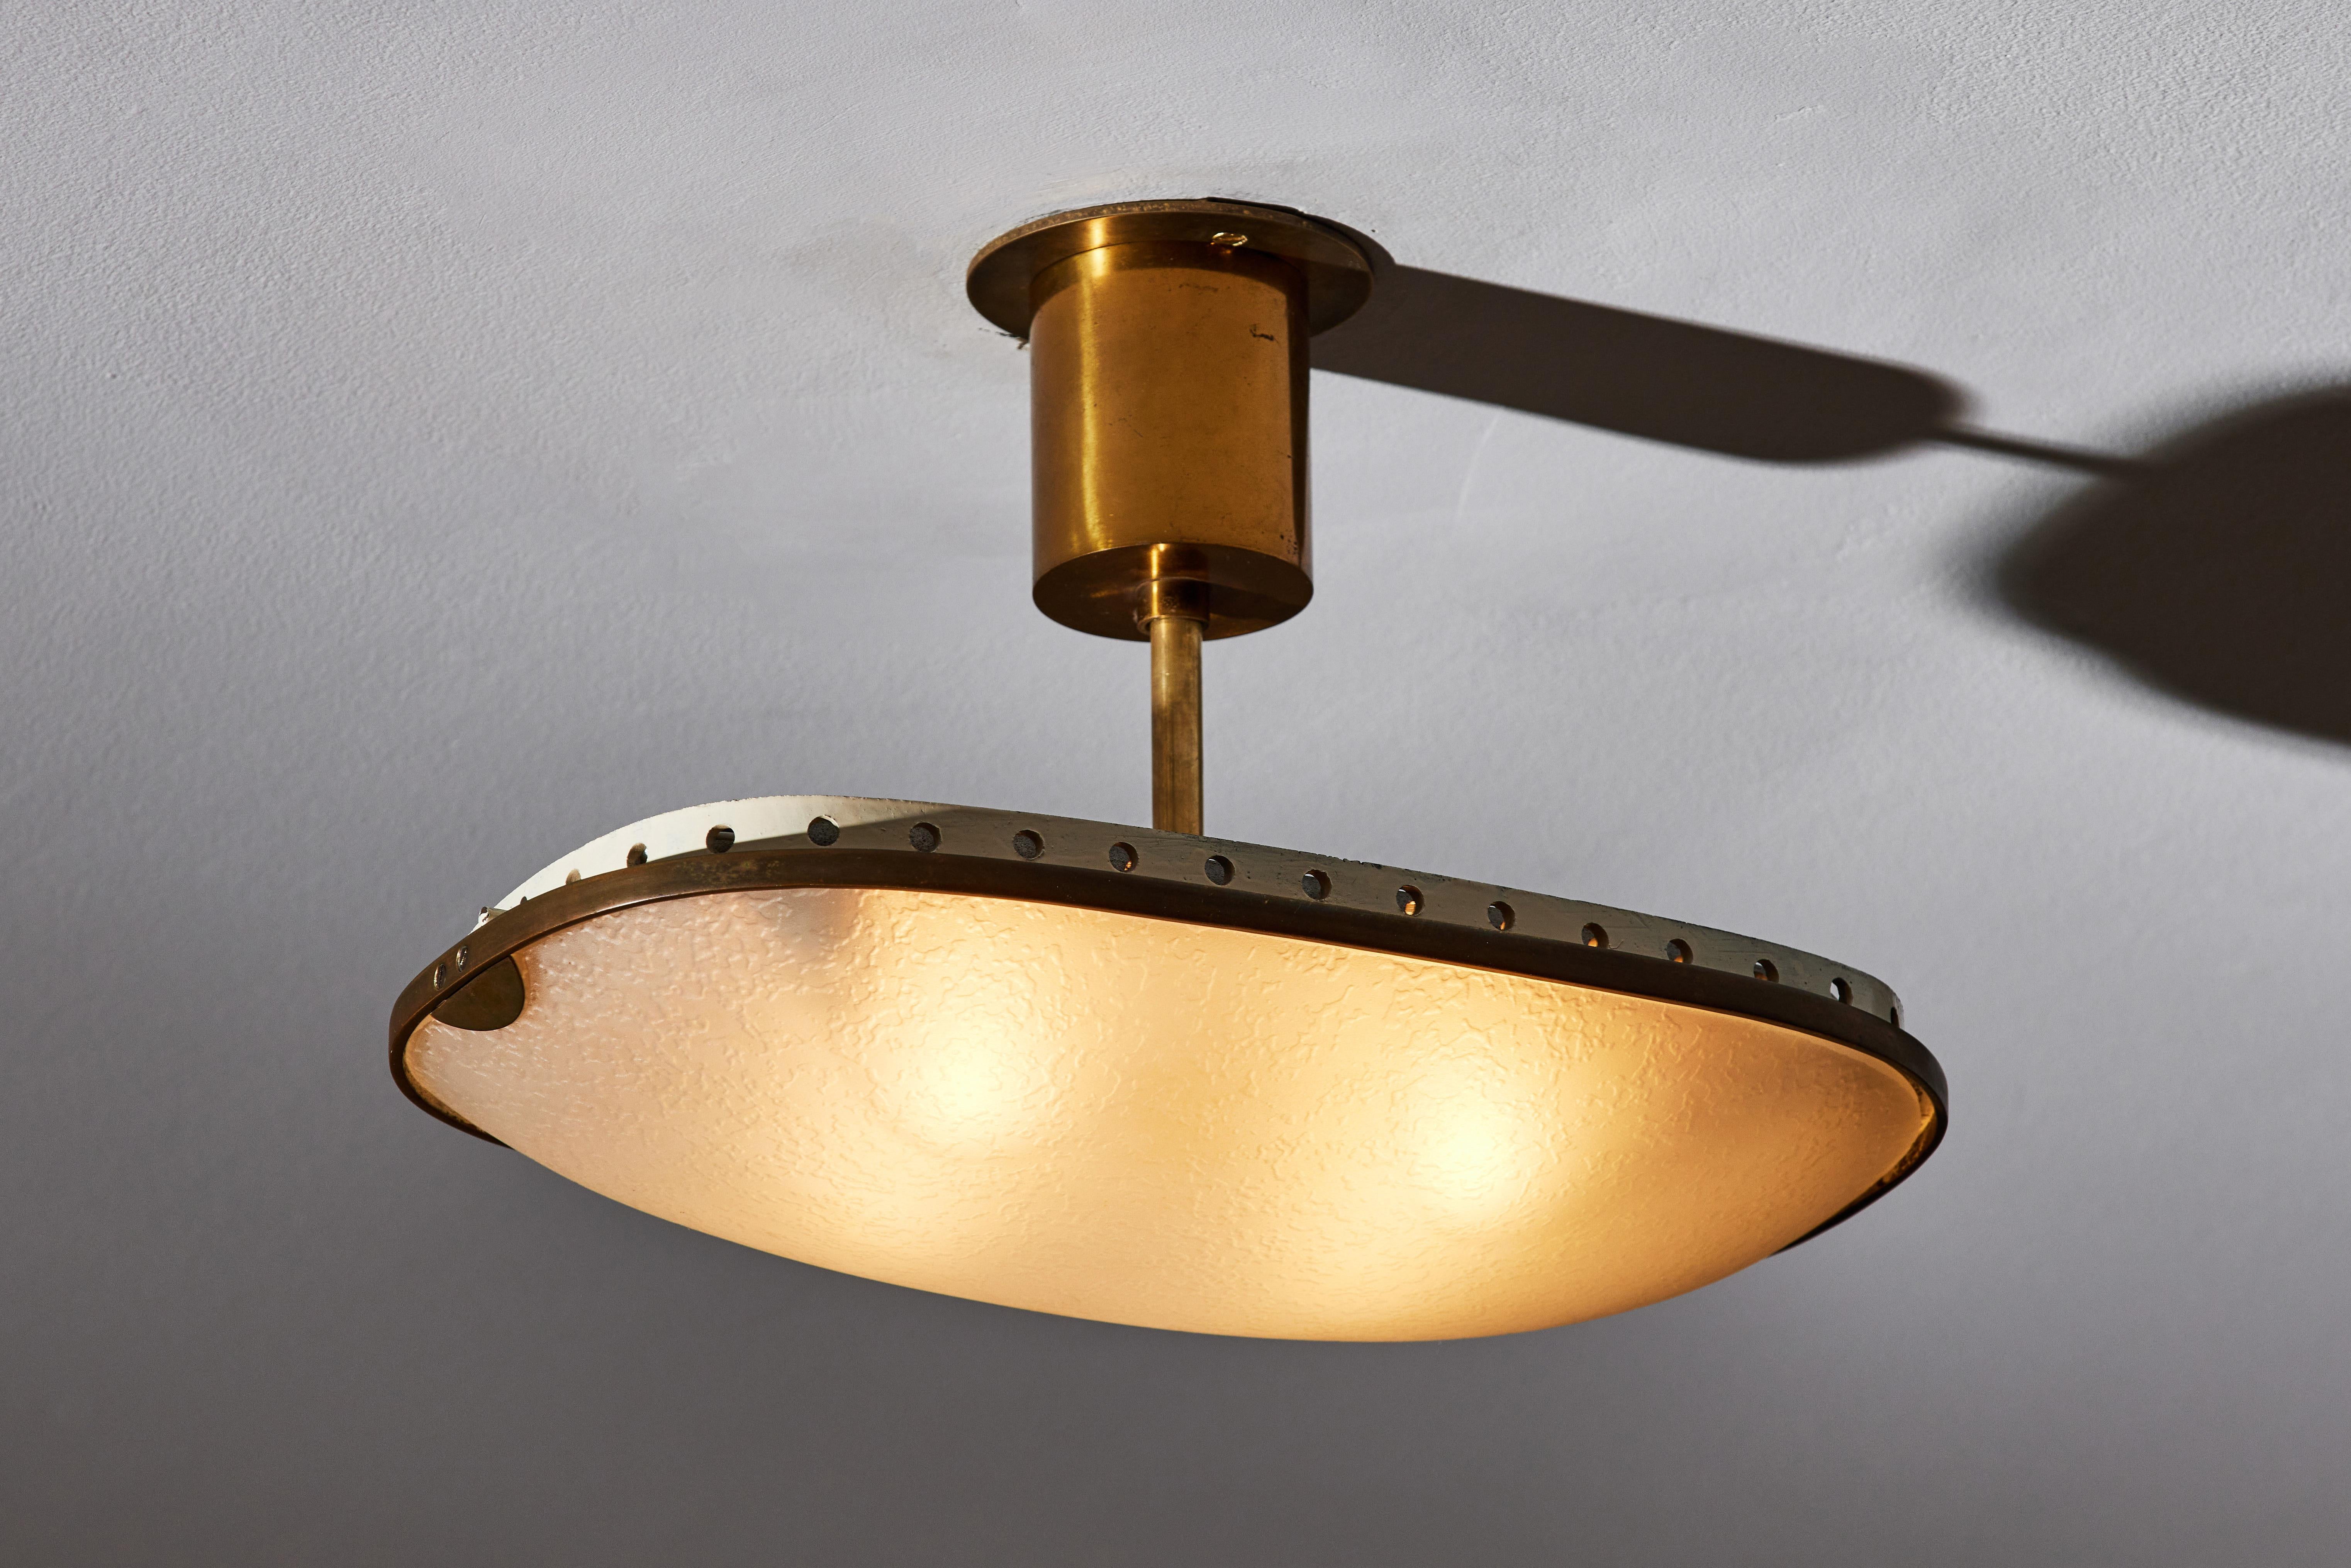 Ceiling light by Fontana Arte. Manufactured in Italy, circa 1950s. Textured glass, brass, painted metal. Custom brass backplate. Wired for US standards. We recommend four E14 40w maximum bulbs. Bulbs provided as a onetime courtesy.